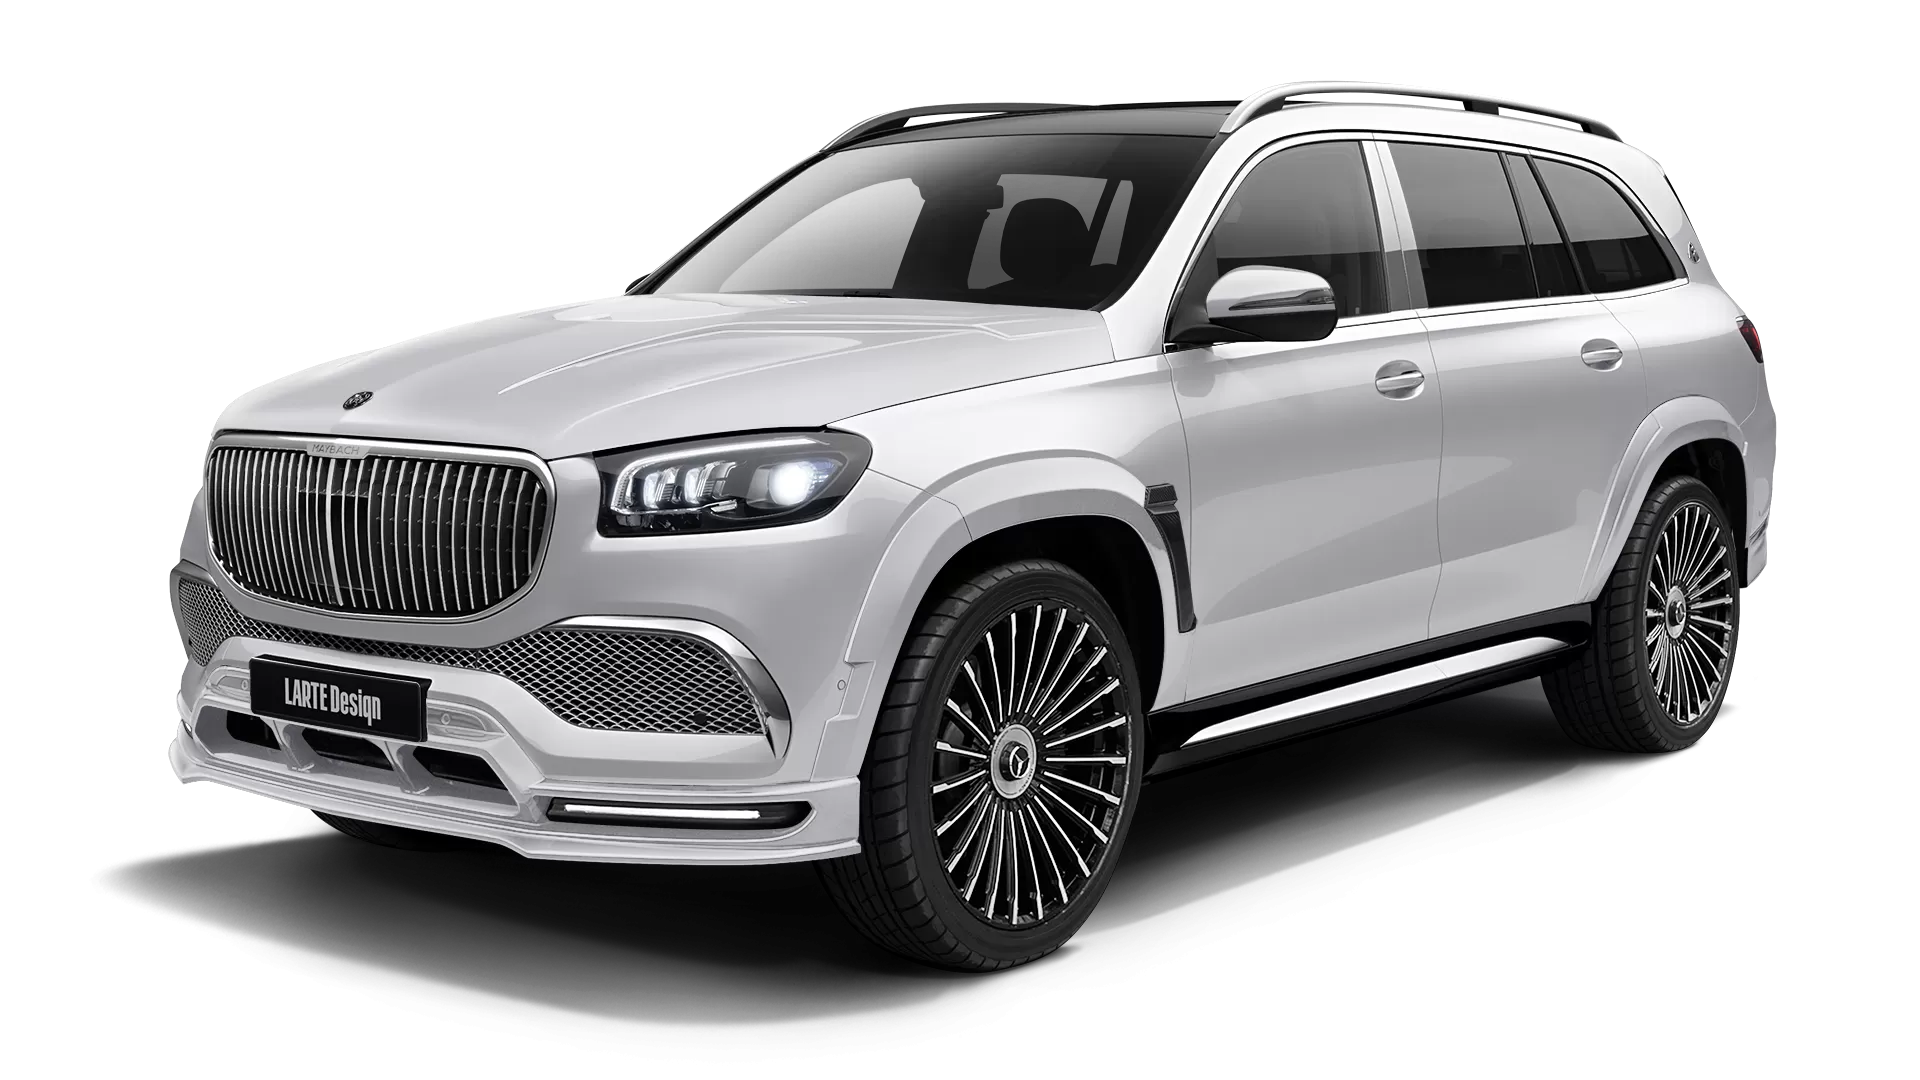 Mercedes Maybach GLS 600 with painted body kit: front view shown in Polar White